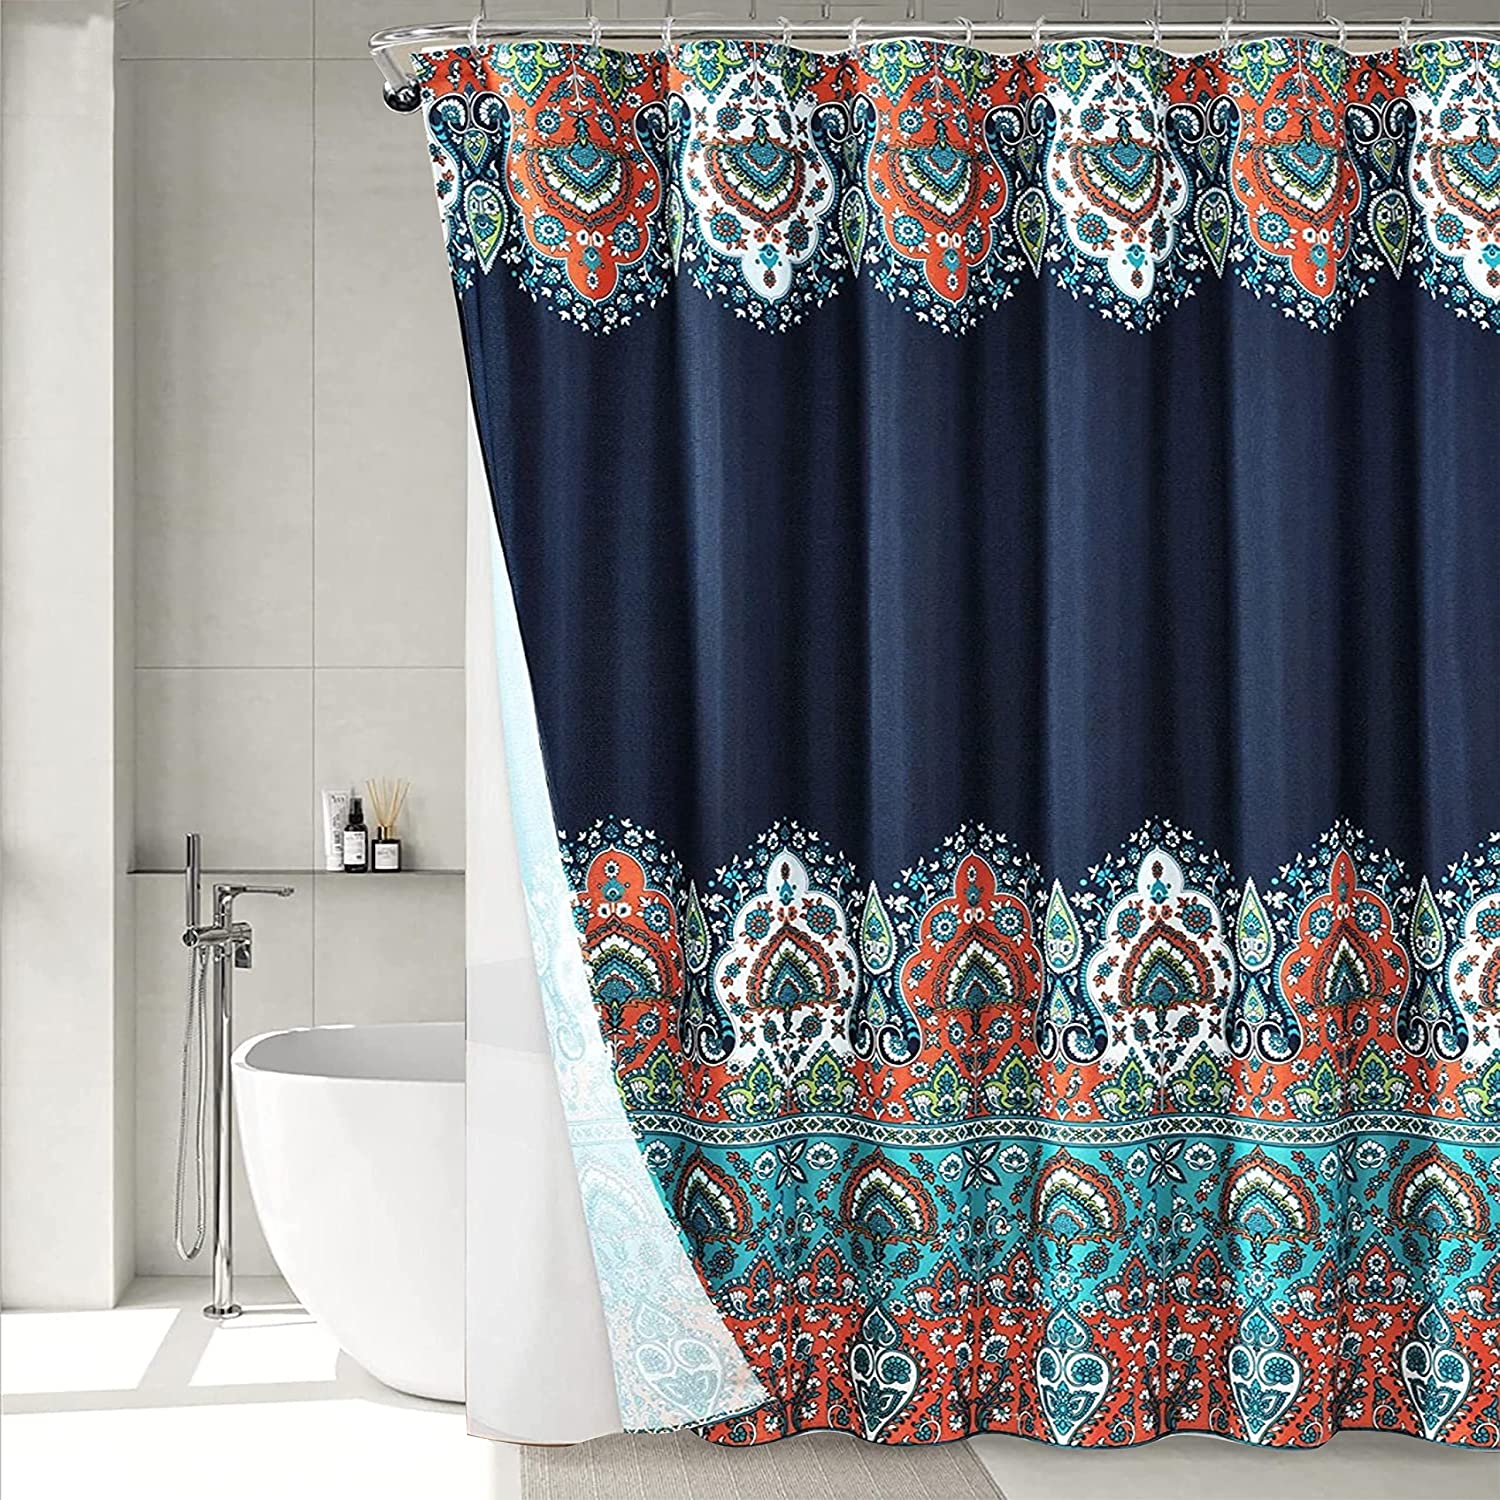 homewards Premium Polyester Royal Blue Floral Design Shower Curtain with 12 Metal Hooks | SS Ball Bearing Rings